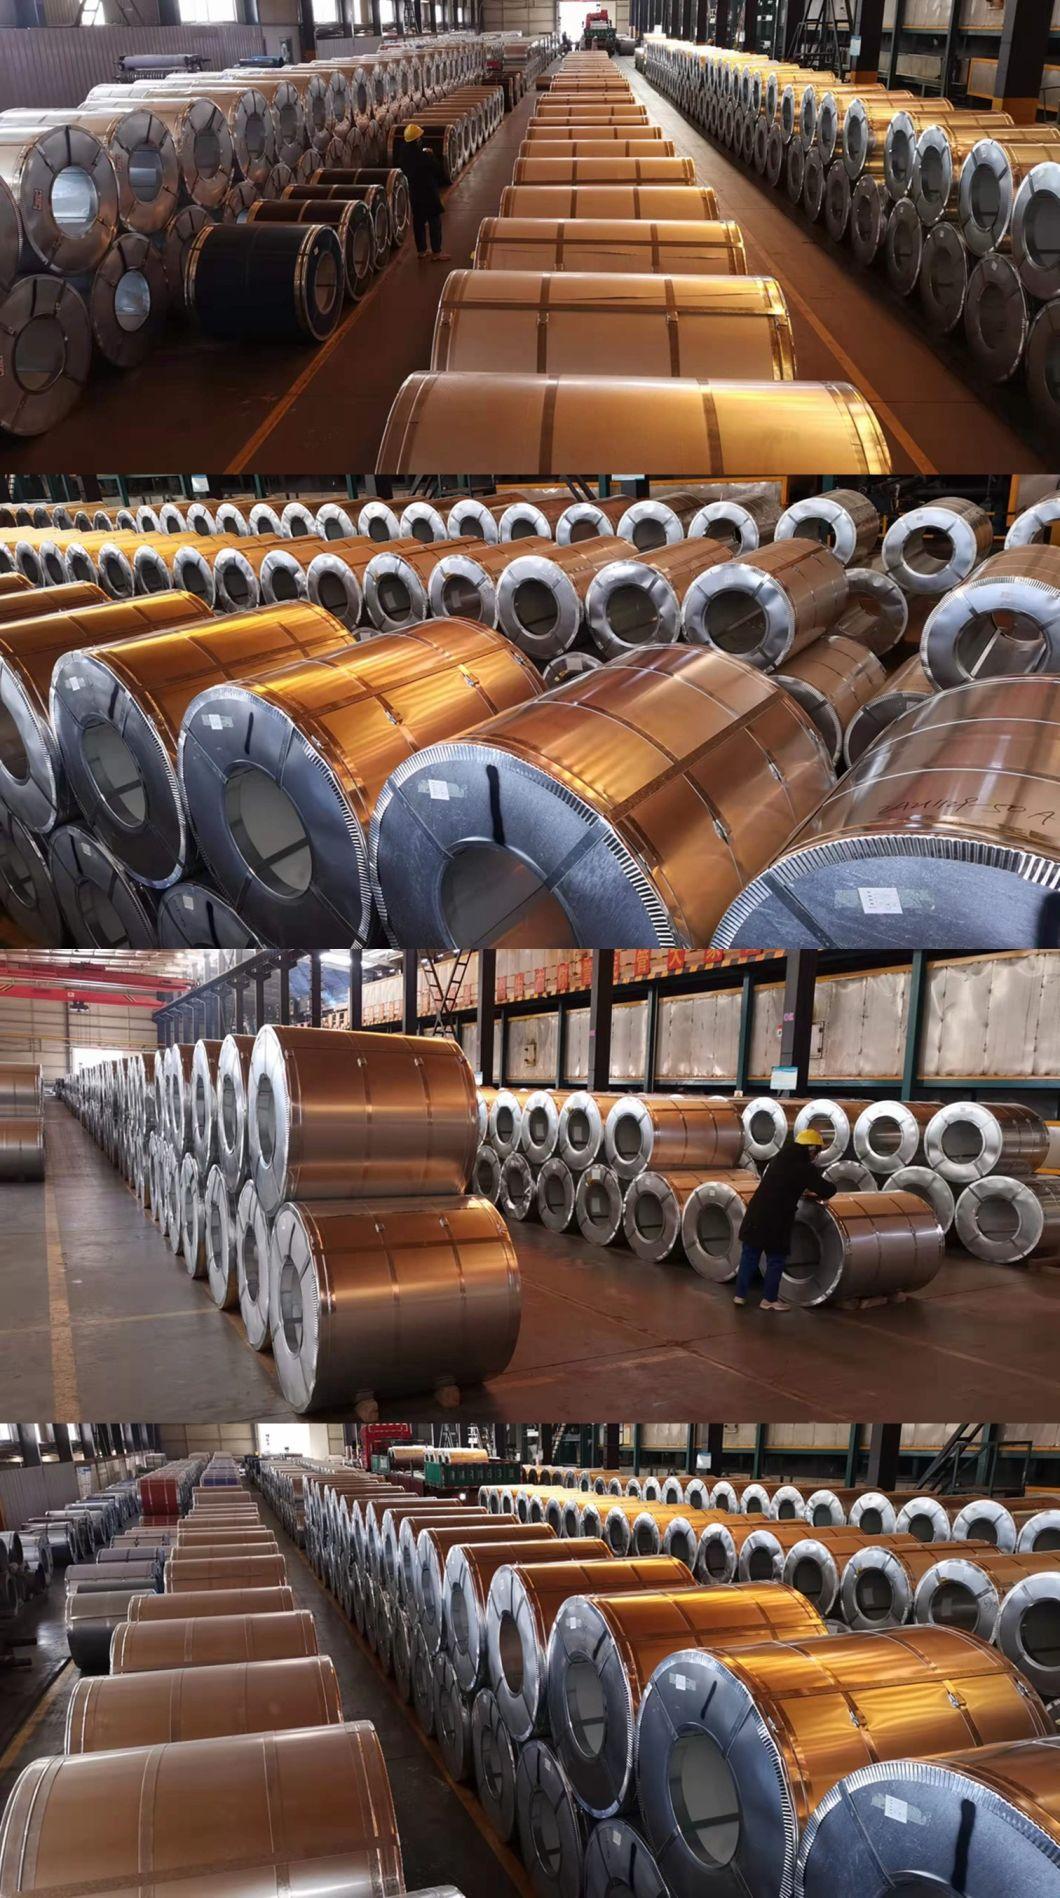 CE, SGS Dx51d 0.12-2.0mm*600-1250mm Products Coils Galvanized Price Steel Coil in China